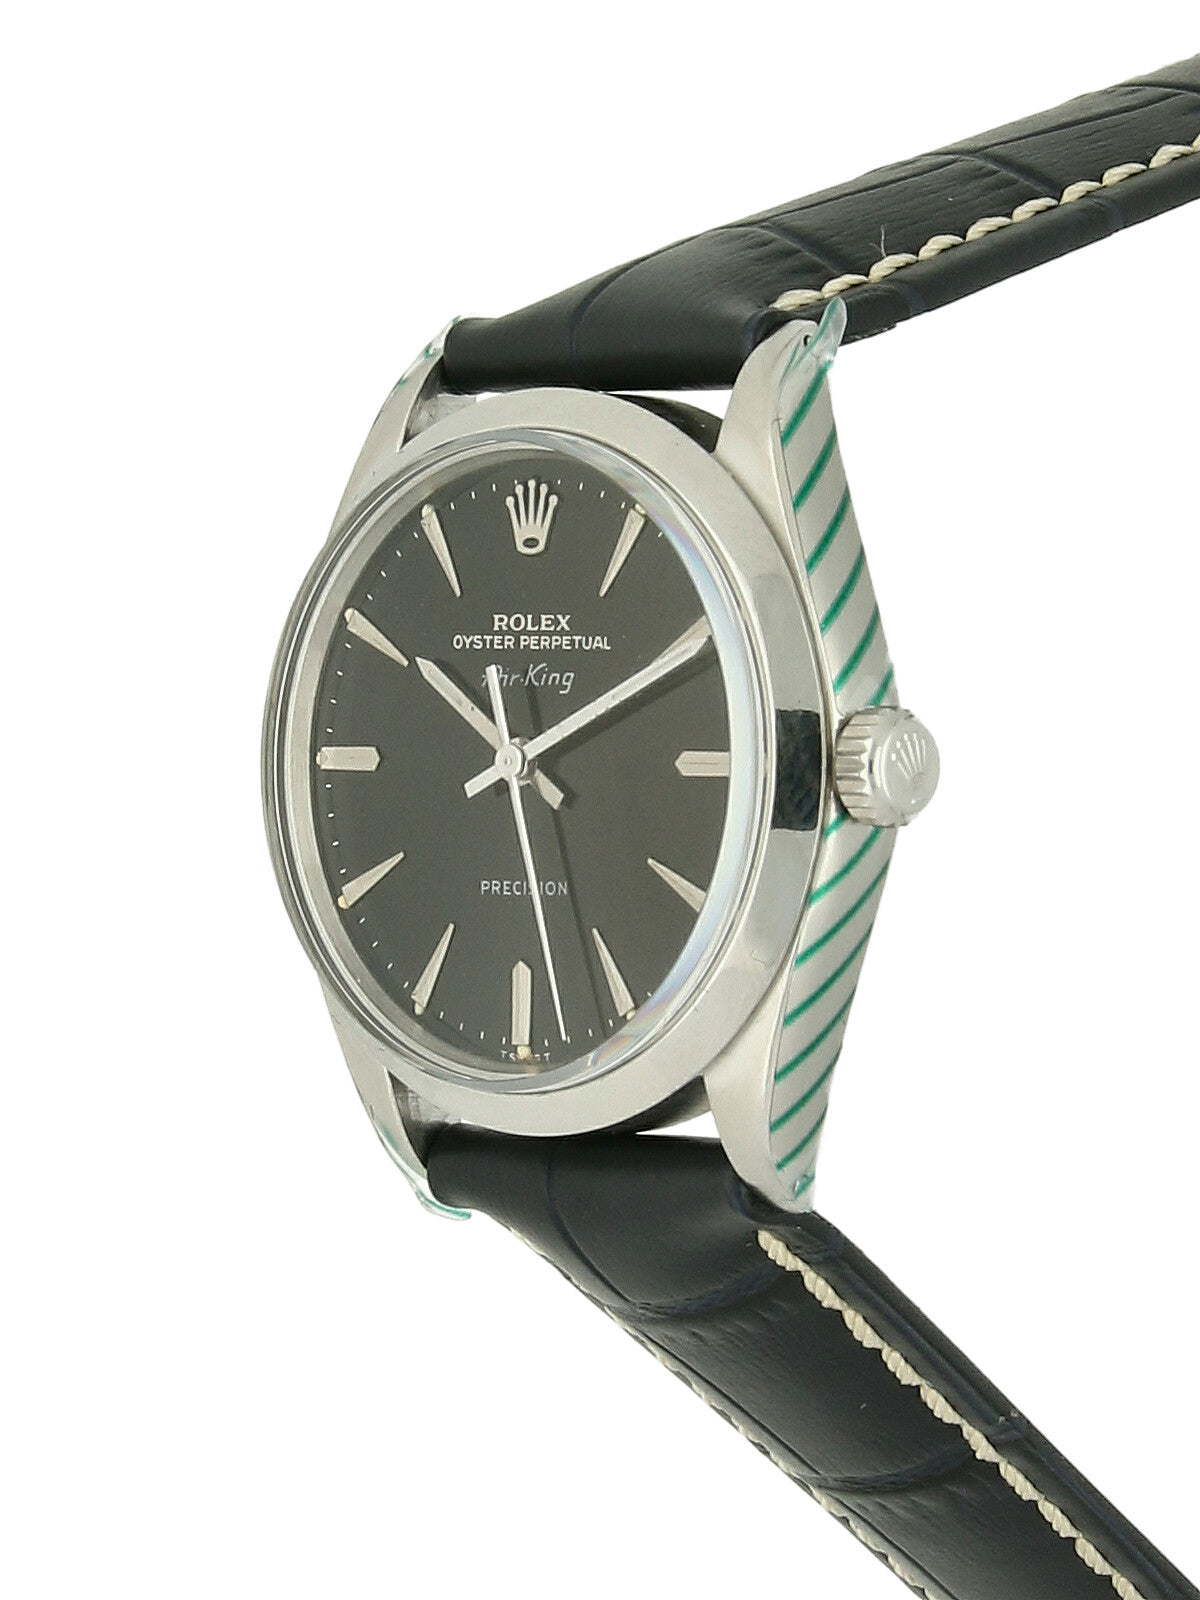 Pre Owned Rolex Air-King Precision Steel Manual Wind 34mm Watch on Black Leather Strap